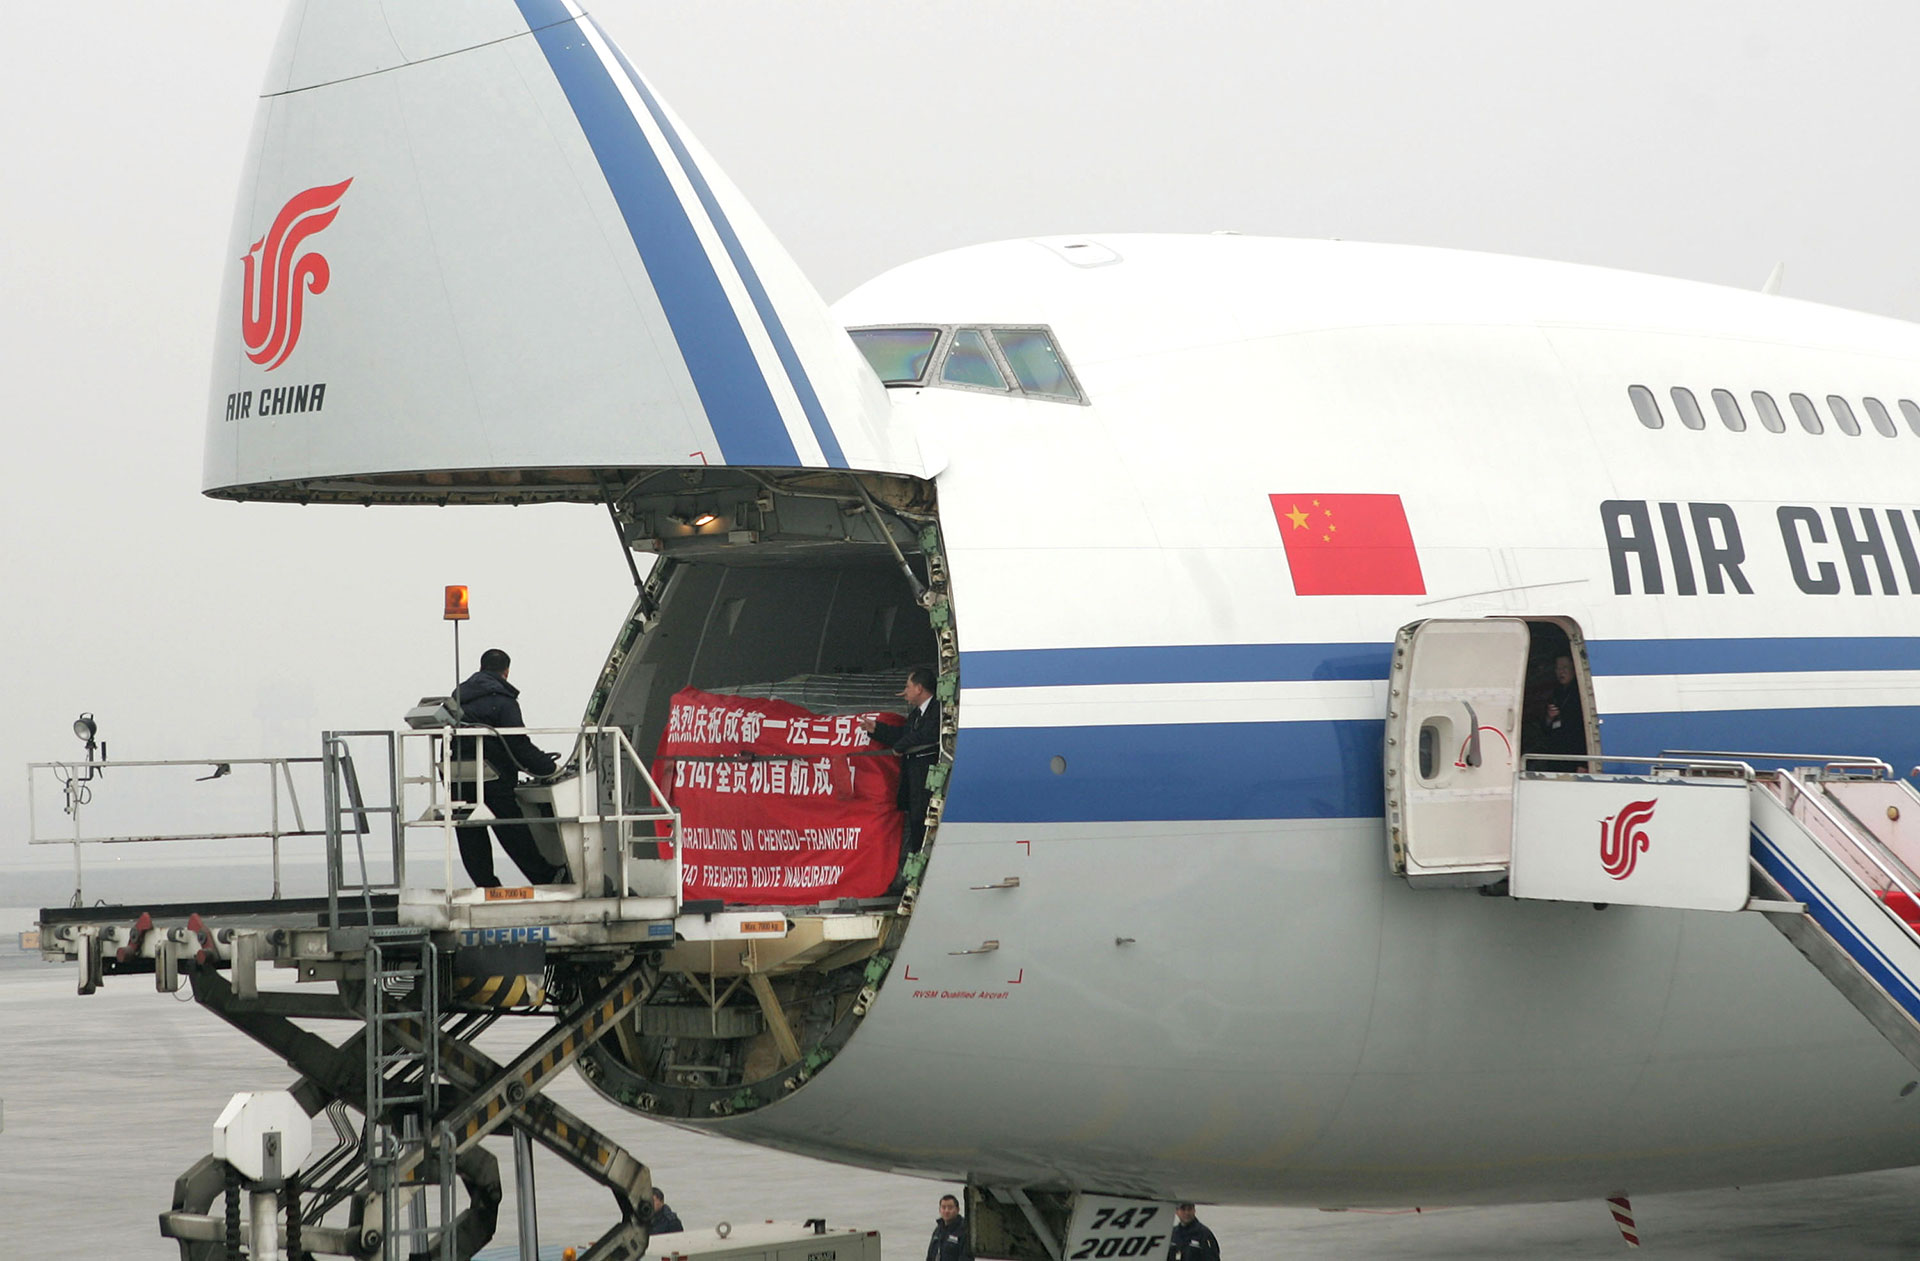 Workers load an Air China Boeing 747-200 bound for Frankfurt at the Chengdu Shuangliu International Airport on December 18, 2005 in Chengdu, Sichuan Province, China.  China Photos/Getty Images/File